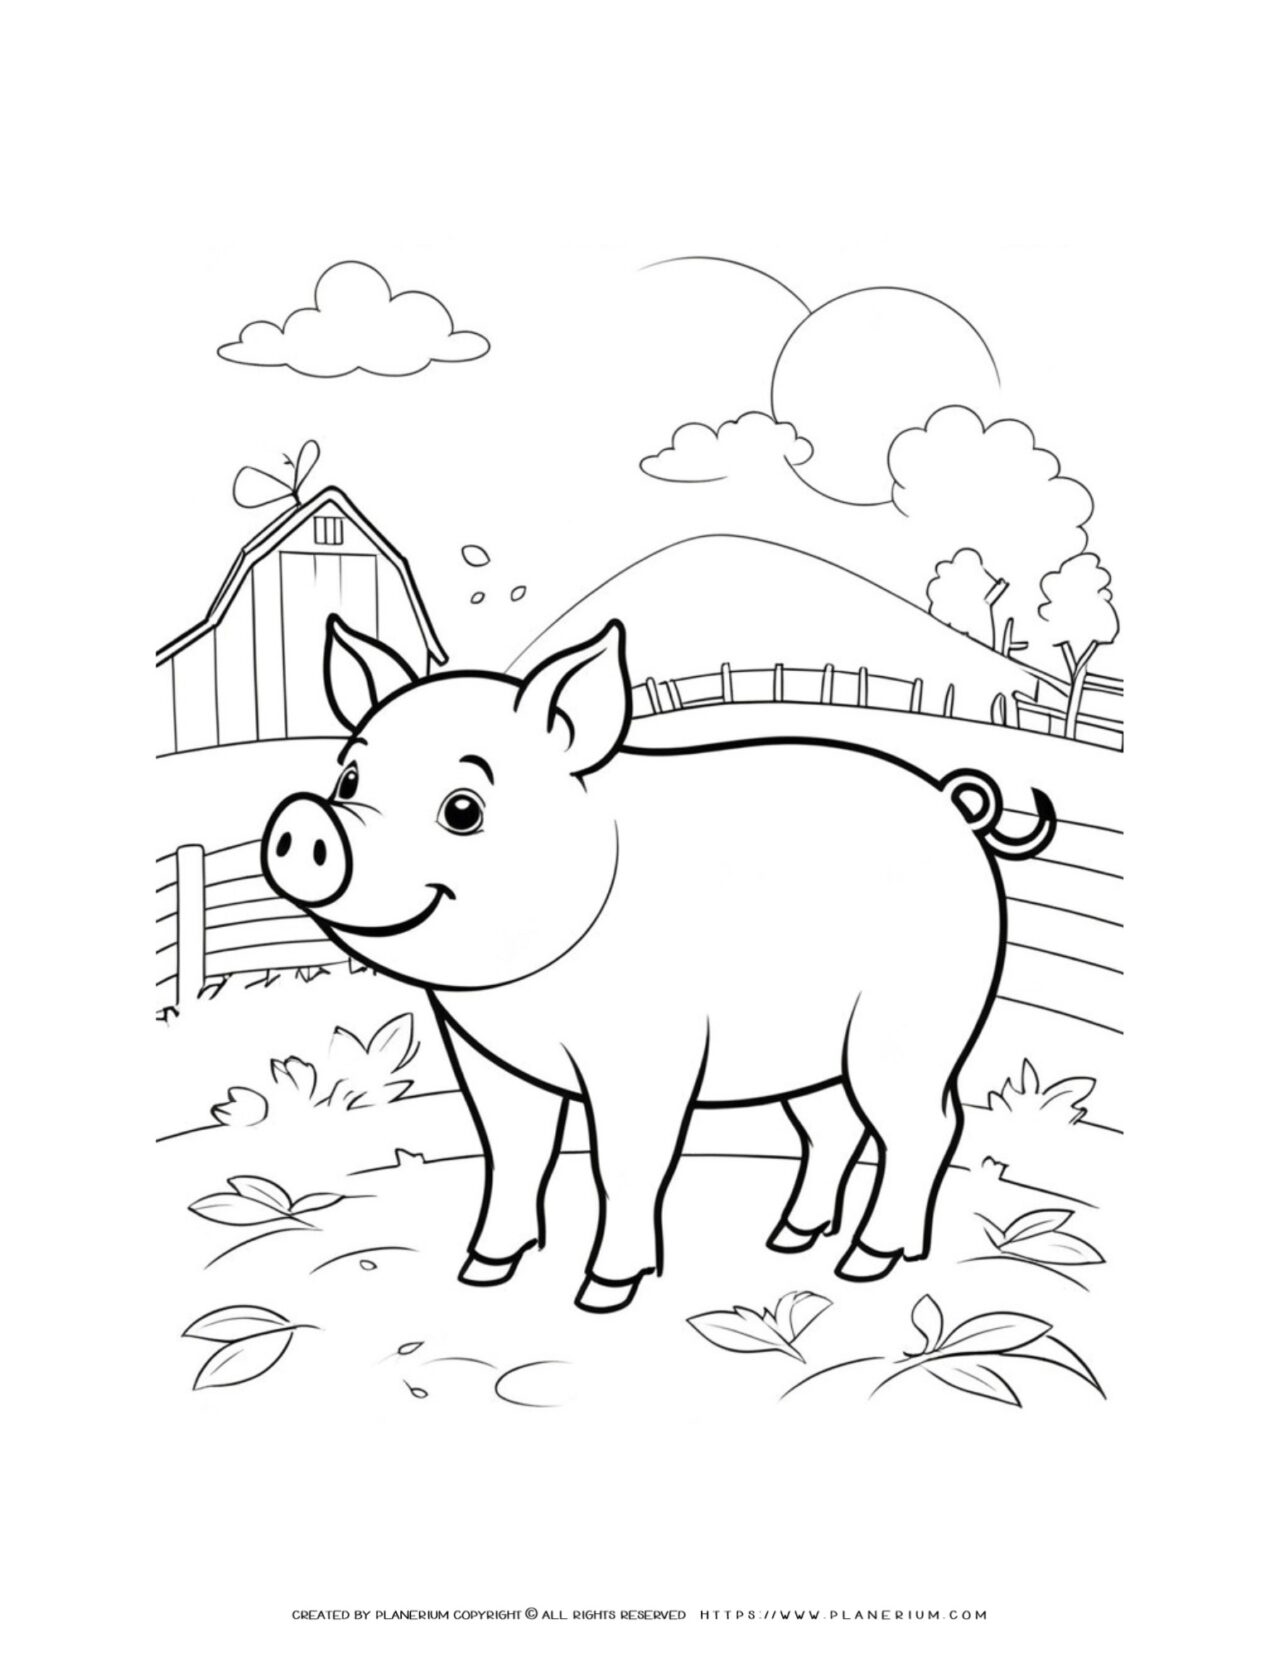 cute-pig-side-view-in-the-farm-coloring-page-for-kids